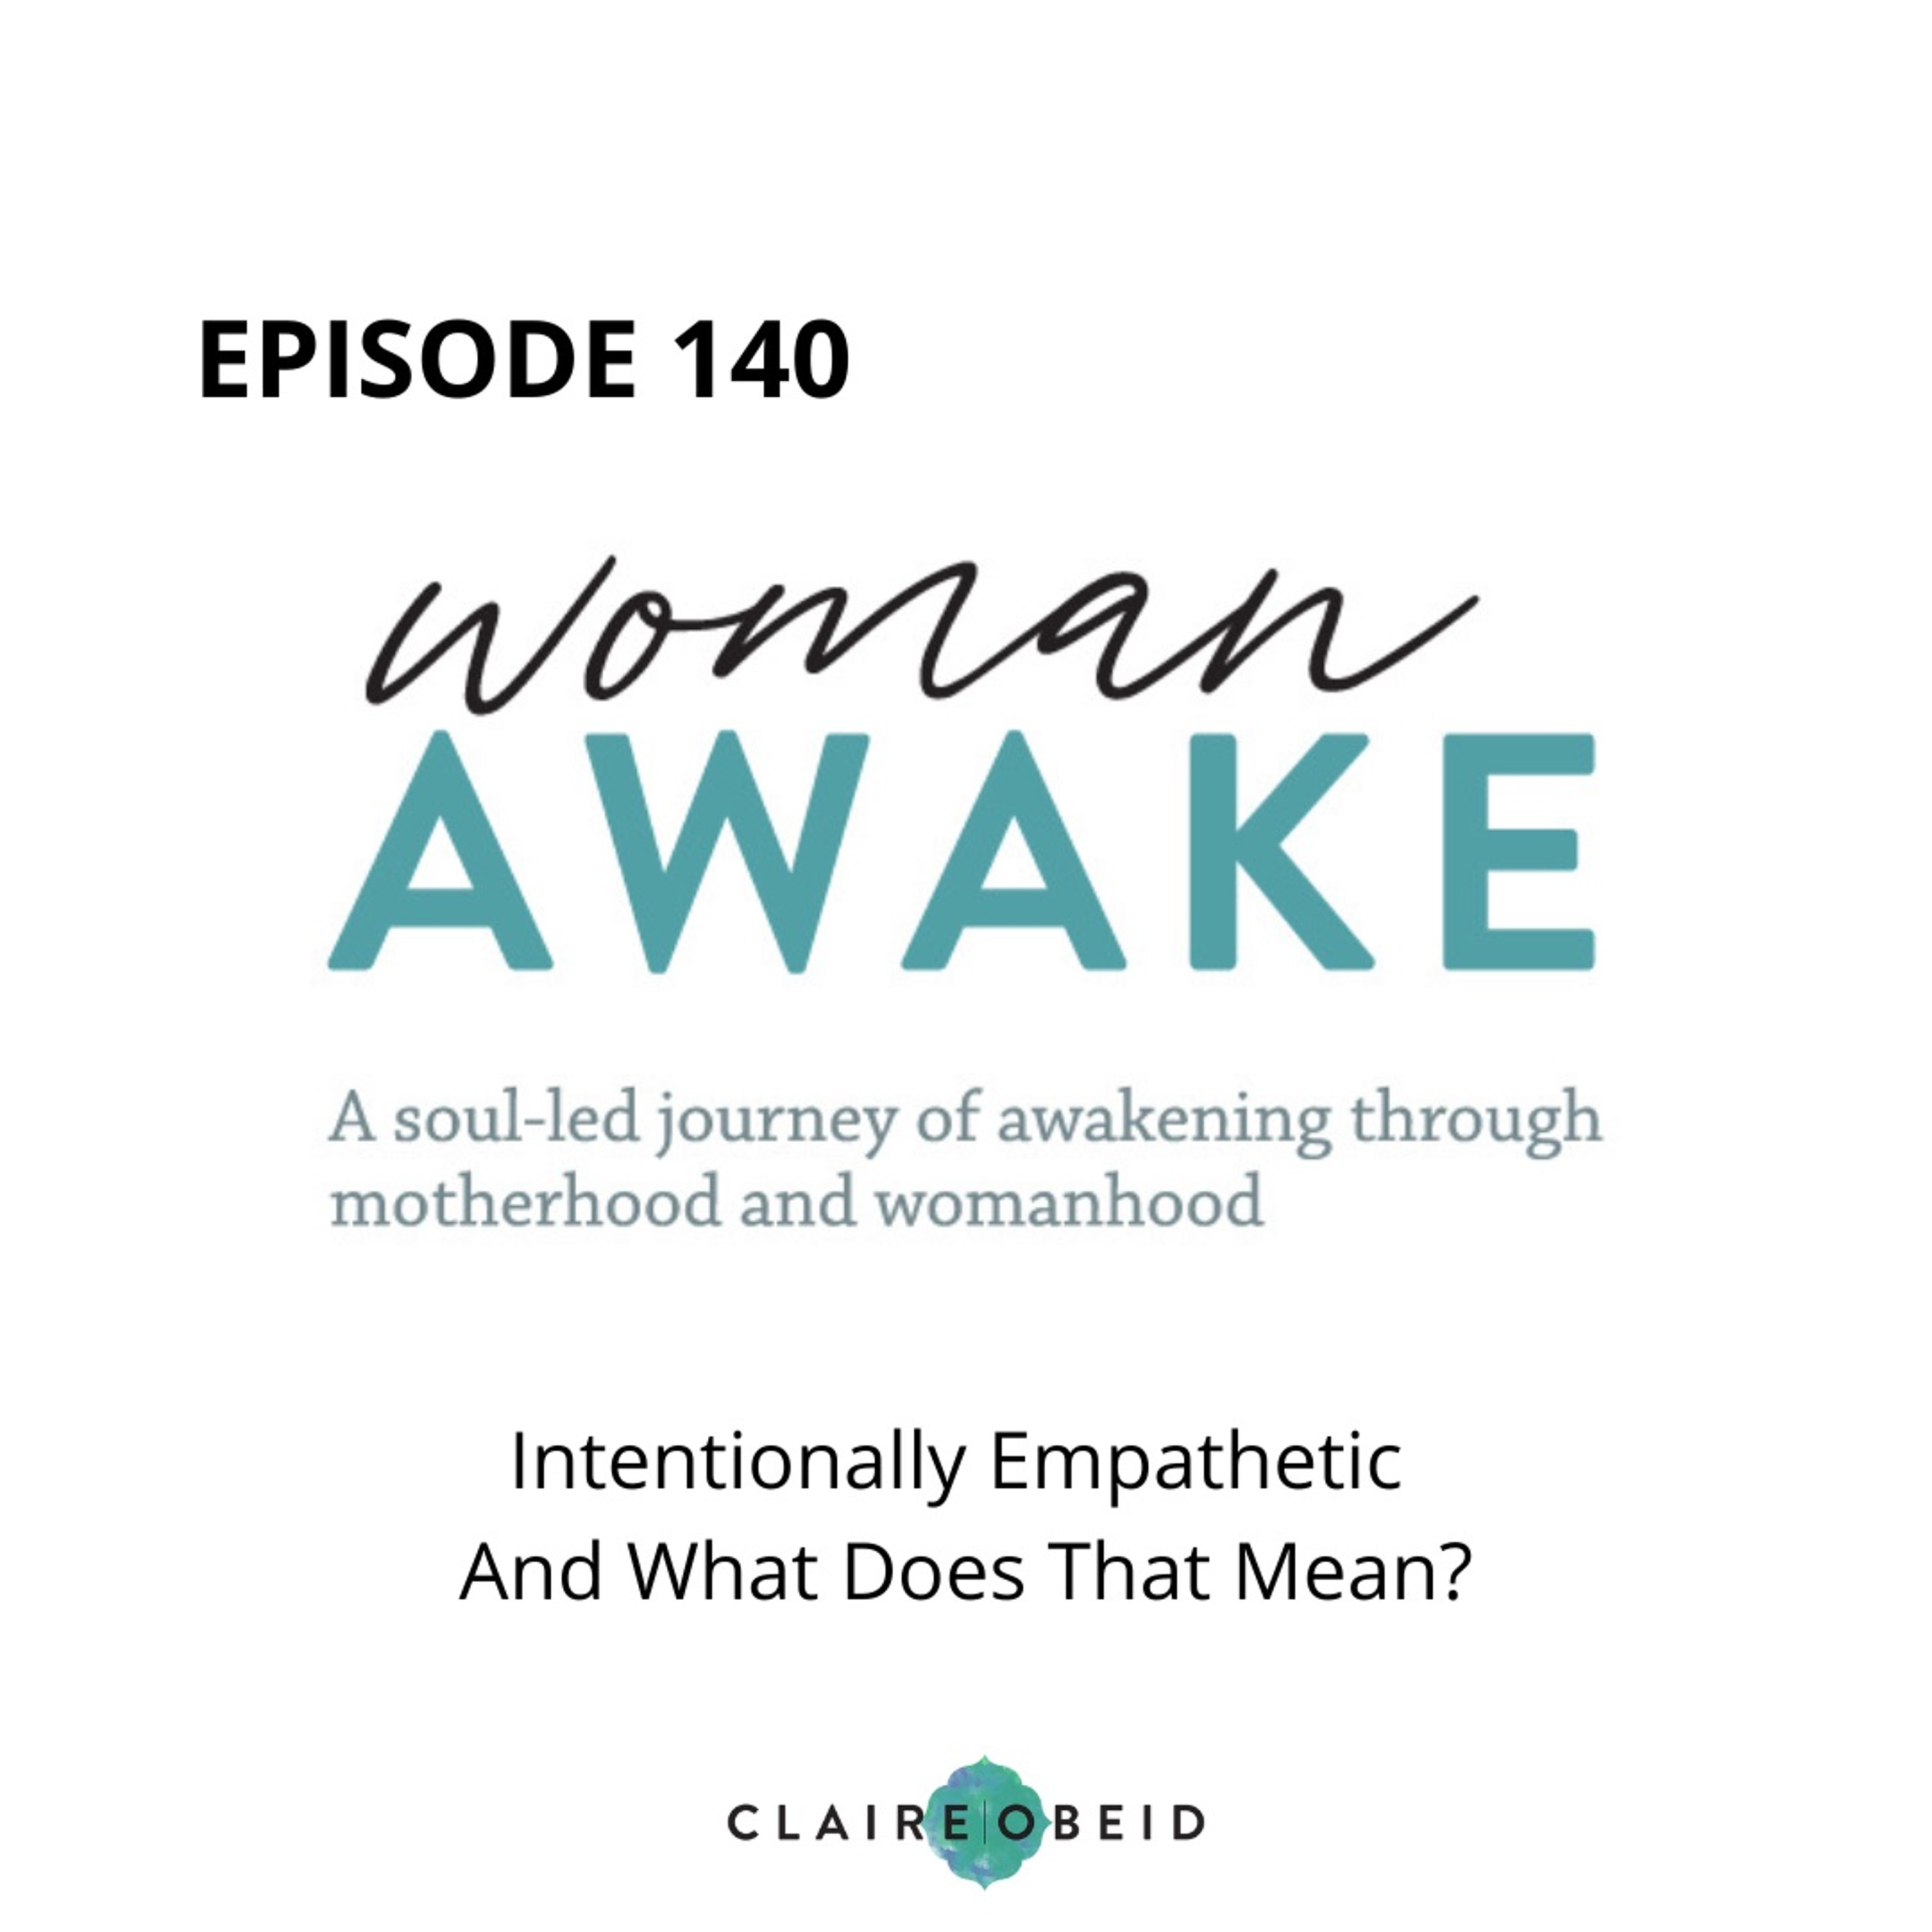 Woman Awake Episode 140 - Intentionally Empathetic And What Does That Mean?